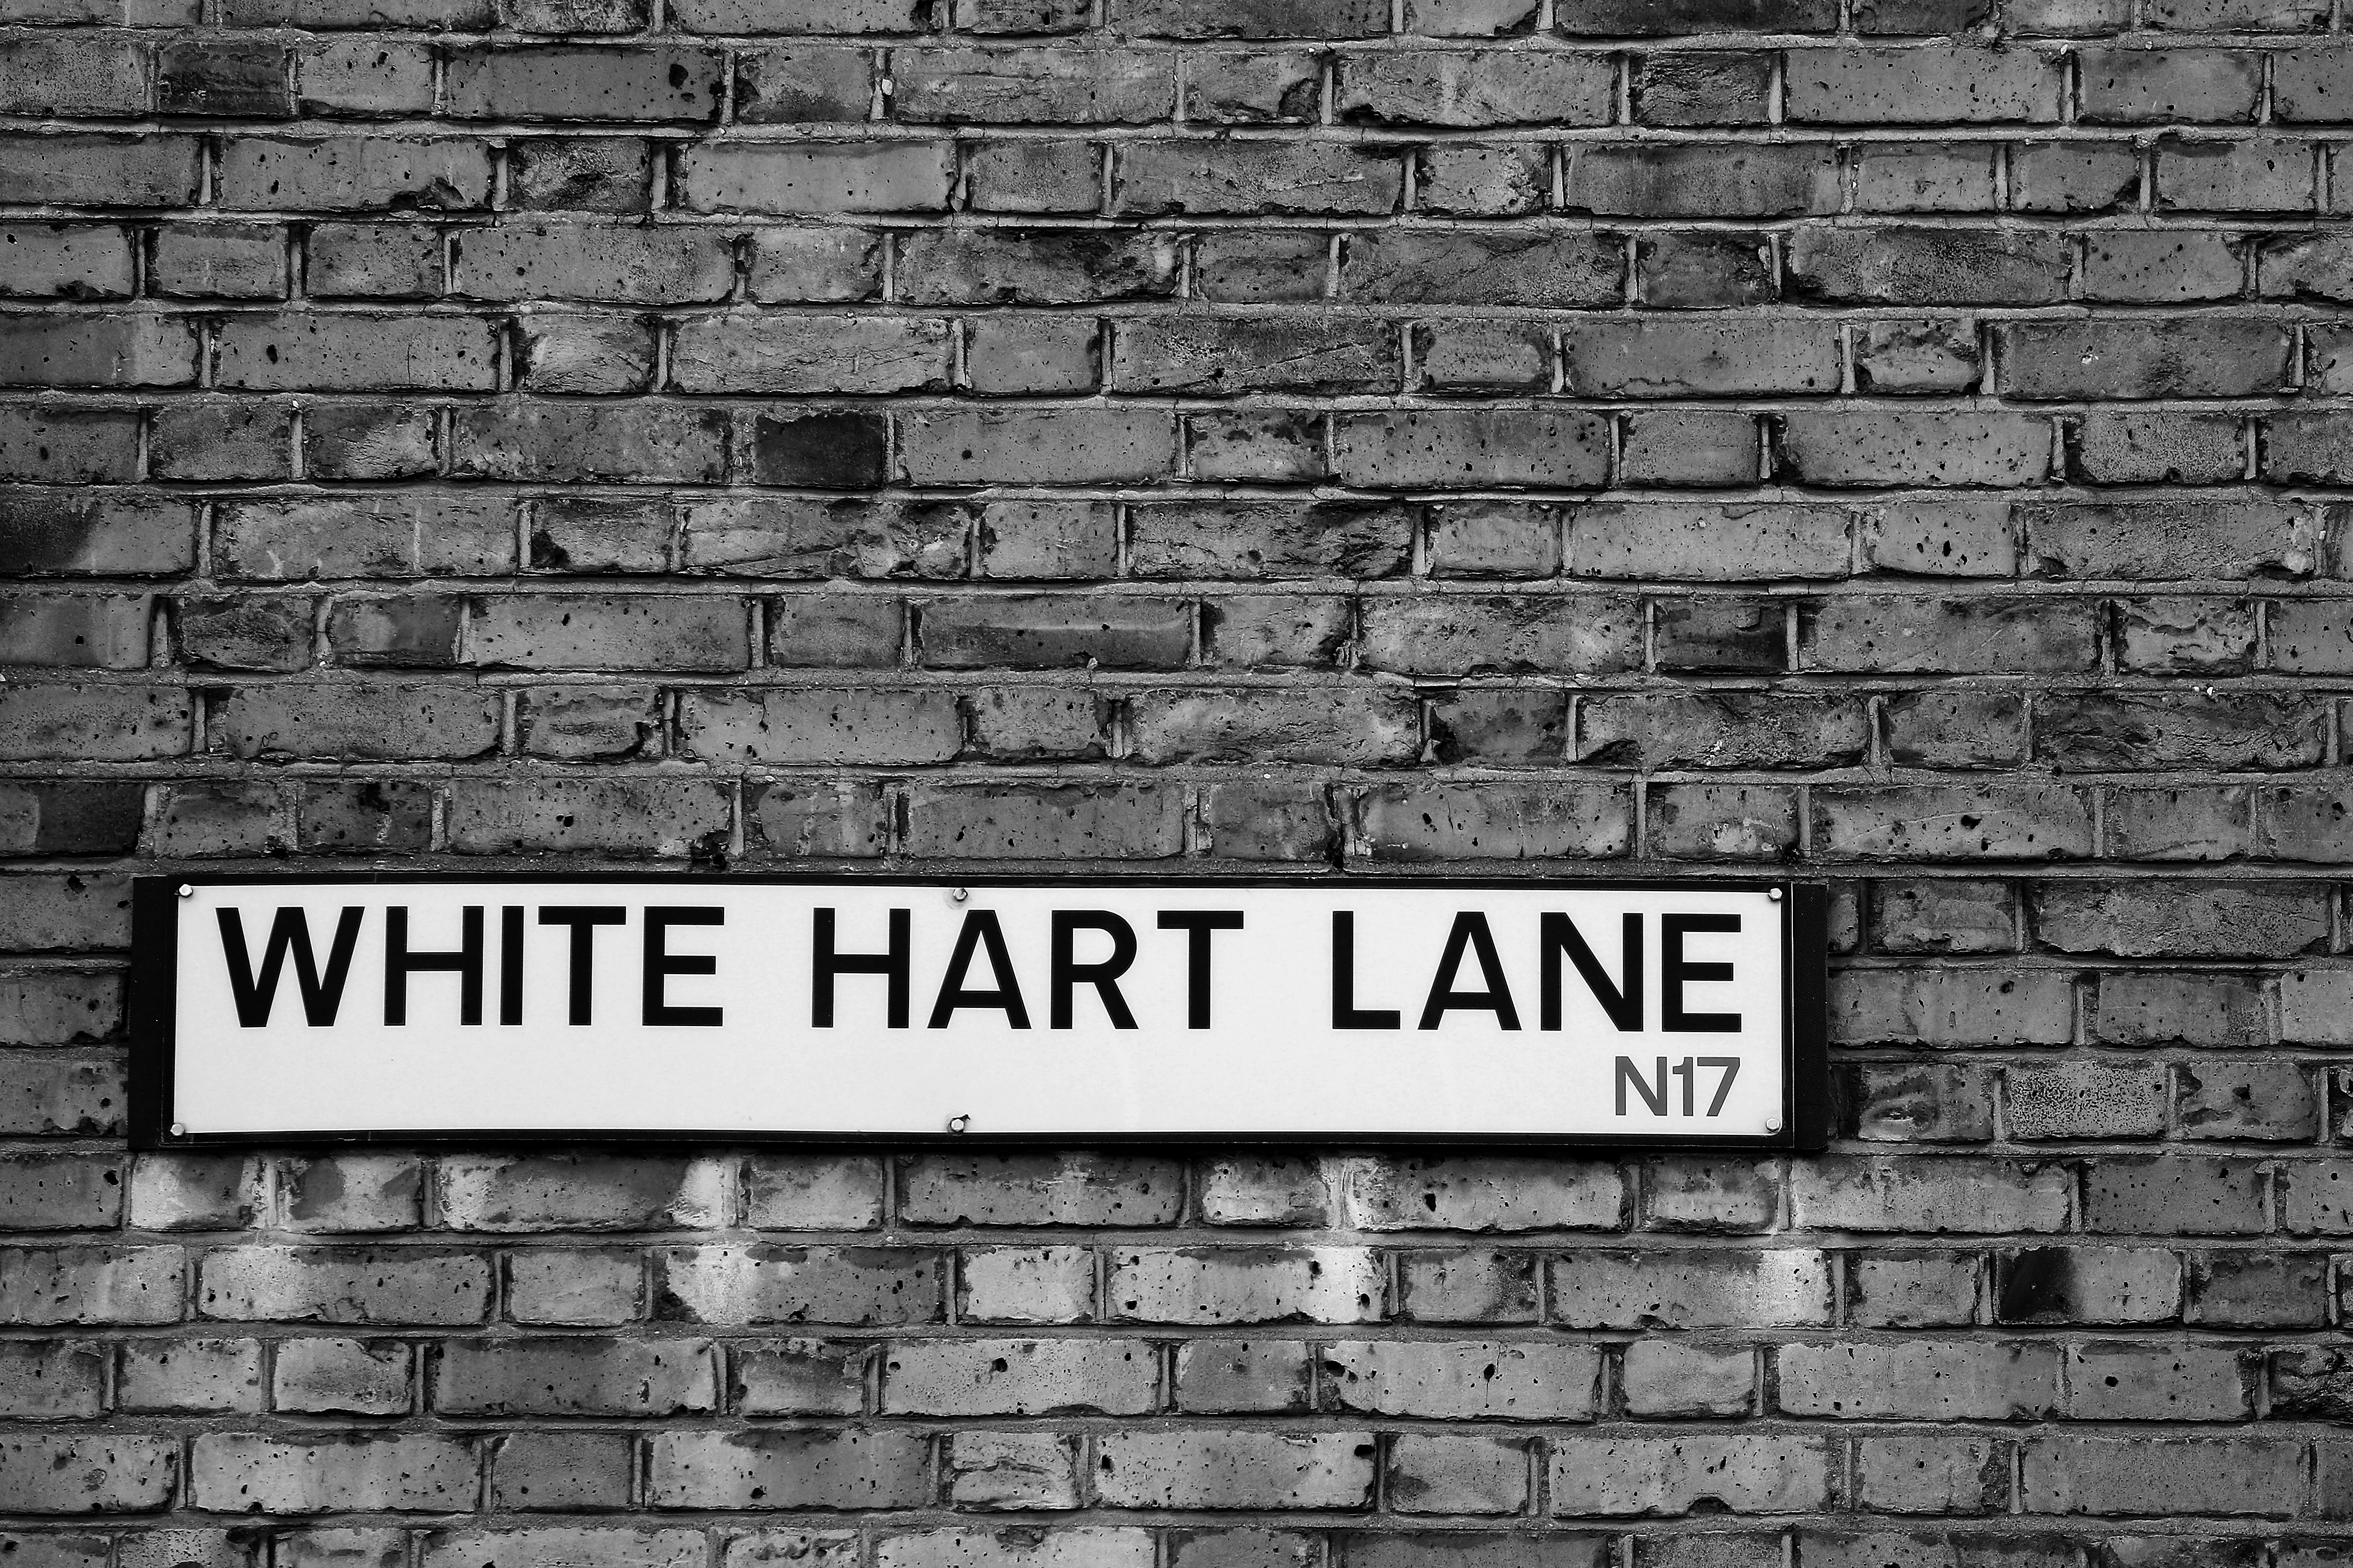 LONDON, ENGLAND - MAY 14:  (EDITORS NOTE: THIS IMAGE HAS BEEN CONVERTED TO BLACK & WHITE) The White Hart Lane street sign is seen prior to the Premier League match between Tottenham Hotspur and Manchester United at White Hart Lane on May 14, 2017 in London, England. Tottenham Hotspur are playing their last ever home match at White Hart Lane after their 112 year stay at the stadium. Spurs will play at Wembley Stadium next season with a move to a newly built stadium for the 2018-19 campaign. (Photo by Richard Heathcote/Getty Images )